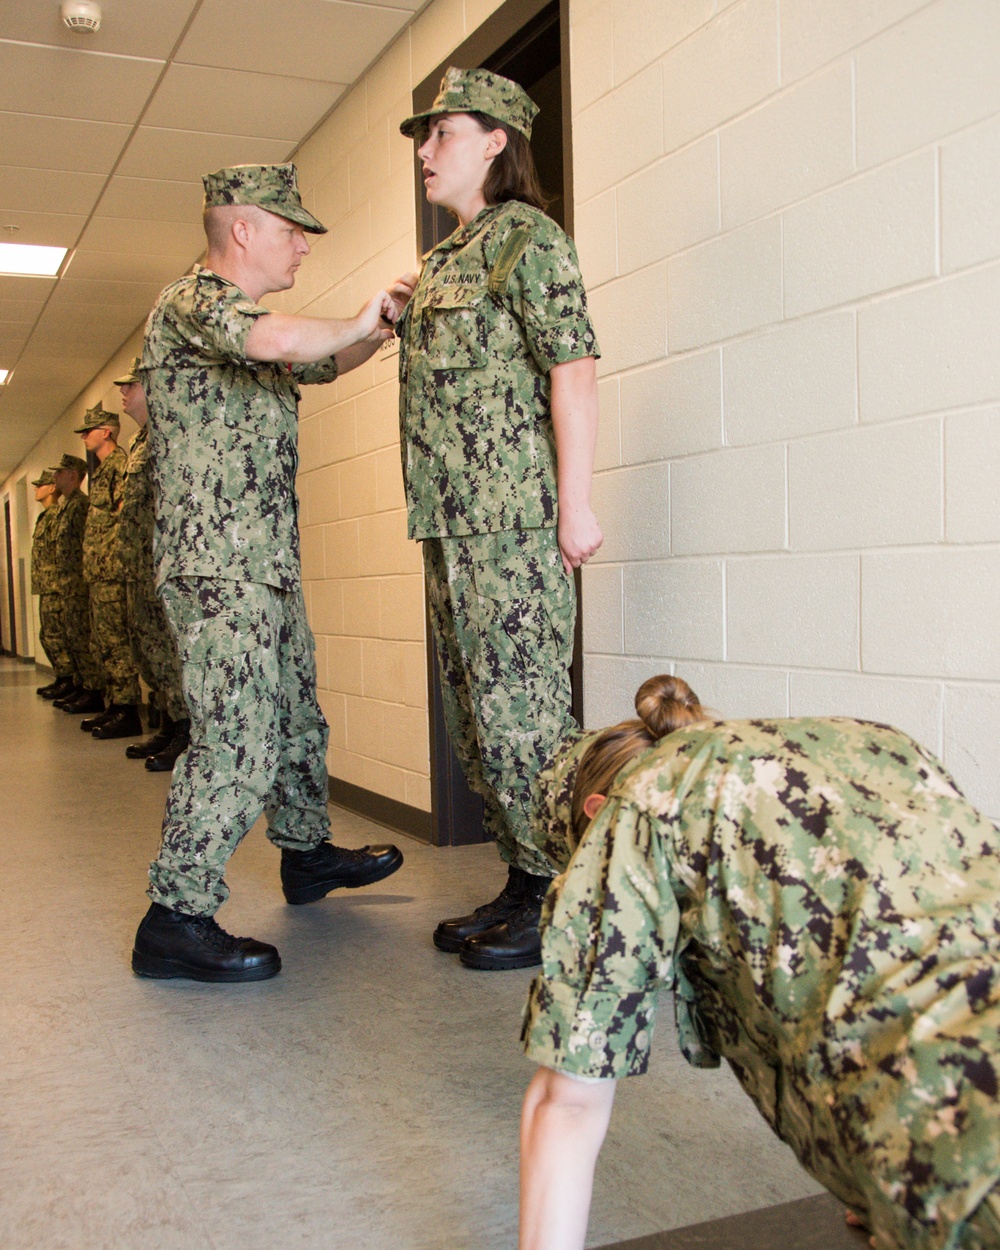 Recruit Division Commanders and Marine Corps Drill Instructors here at Officer Training Command in Newport, Rhode Island (OTCN) conducts the Navy Working Uniform inspection for Officer Candidate School (OCS) class 01-20 on Aug. 9, 2019.